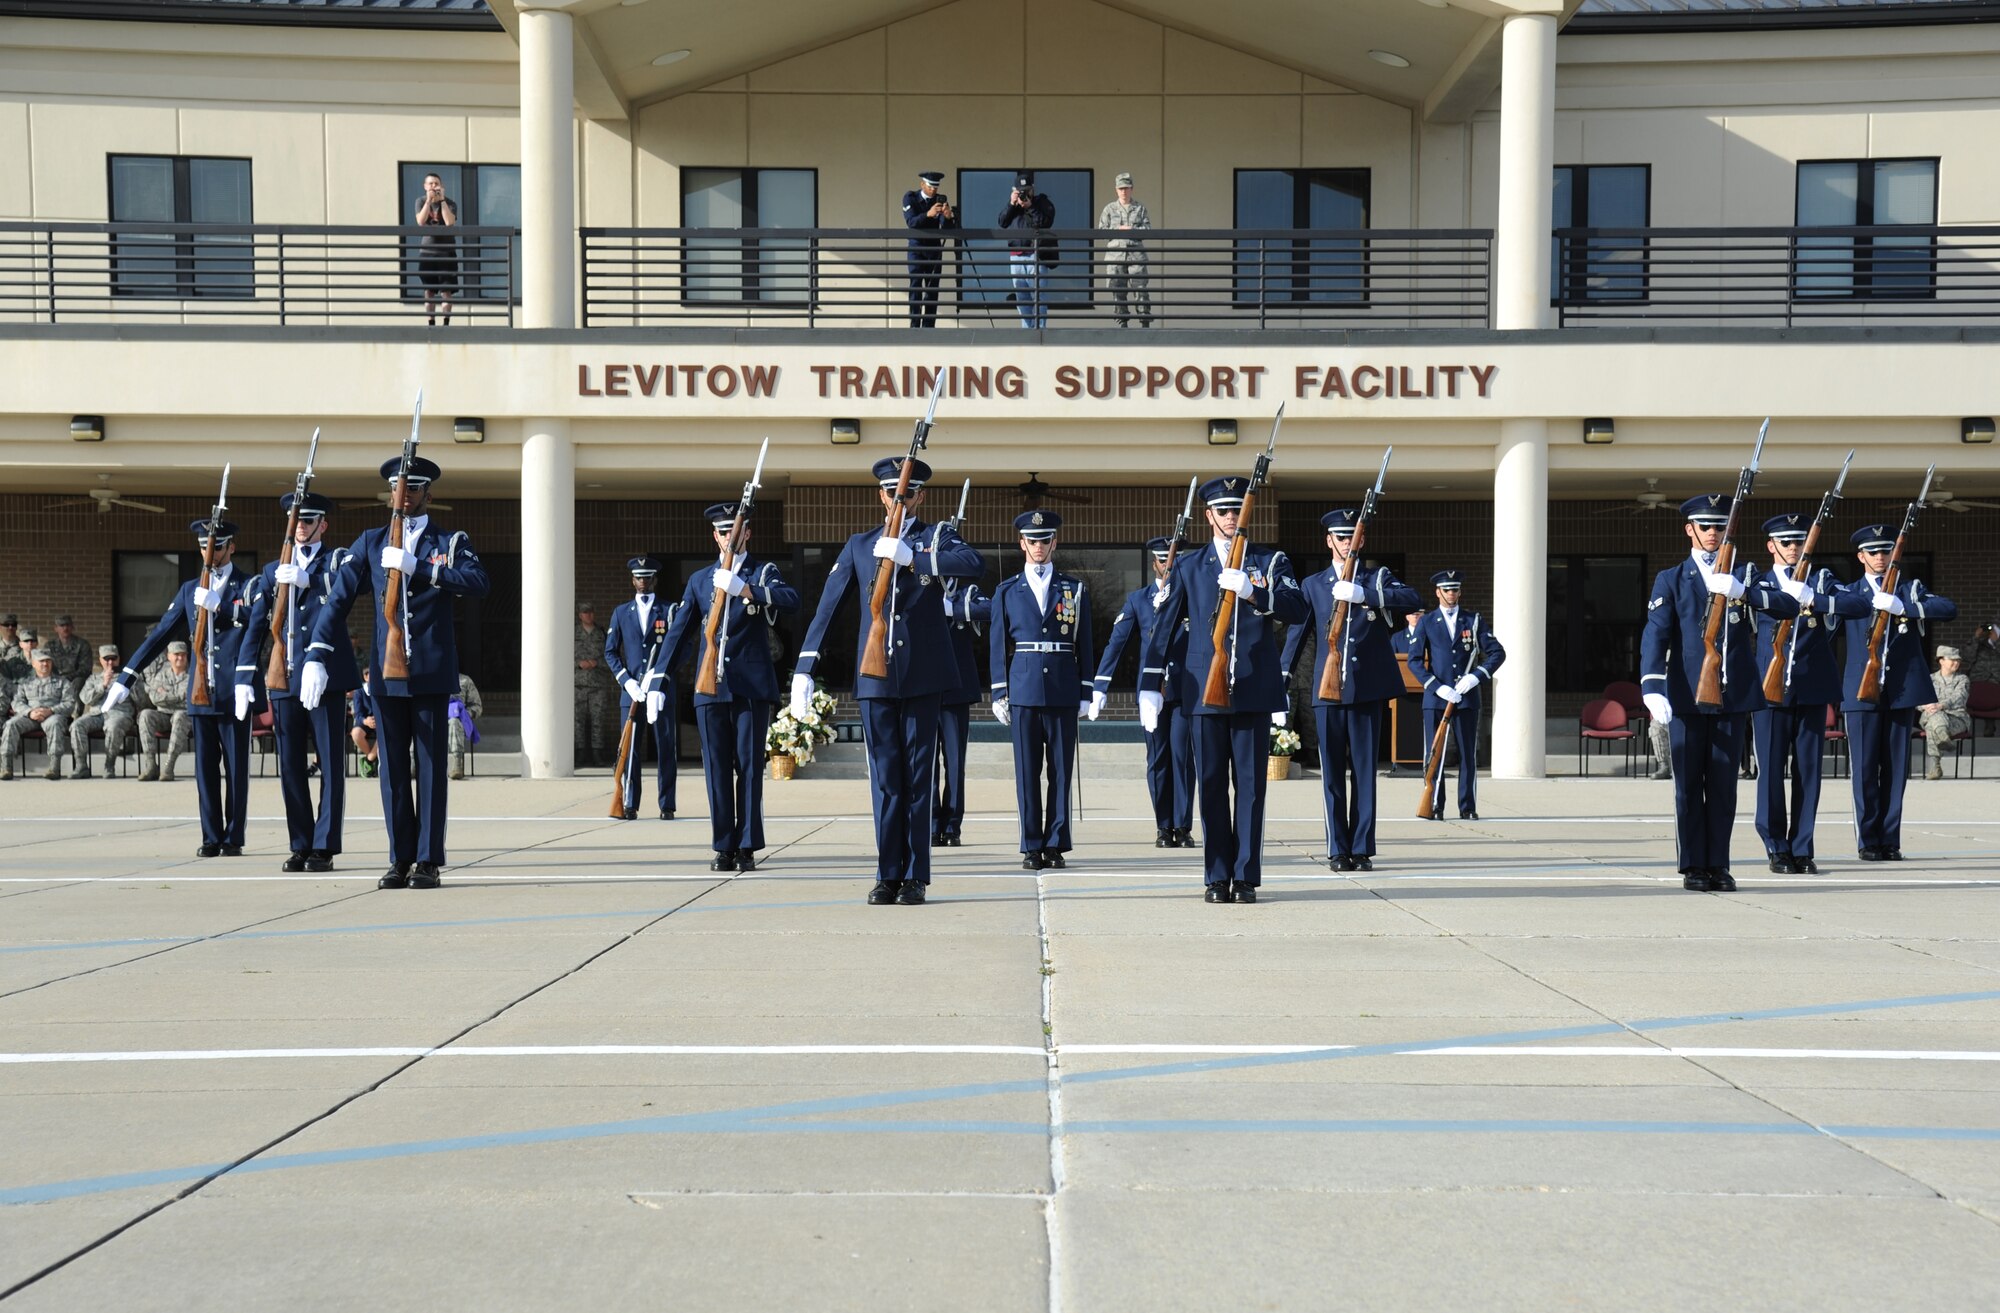 The U.S. Air Force Honor Guard Drill Team performs a new routine on the drill pad behind the Levitow Training Support Facility March 7, 2014, at Keesler Air Force Base, Miss.  The routine was developed here during the past month and will be used for the next year. (U.S. Air Force photo by Kemberly Groue)